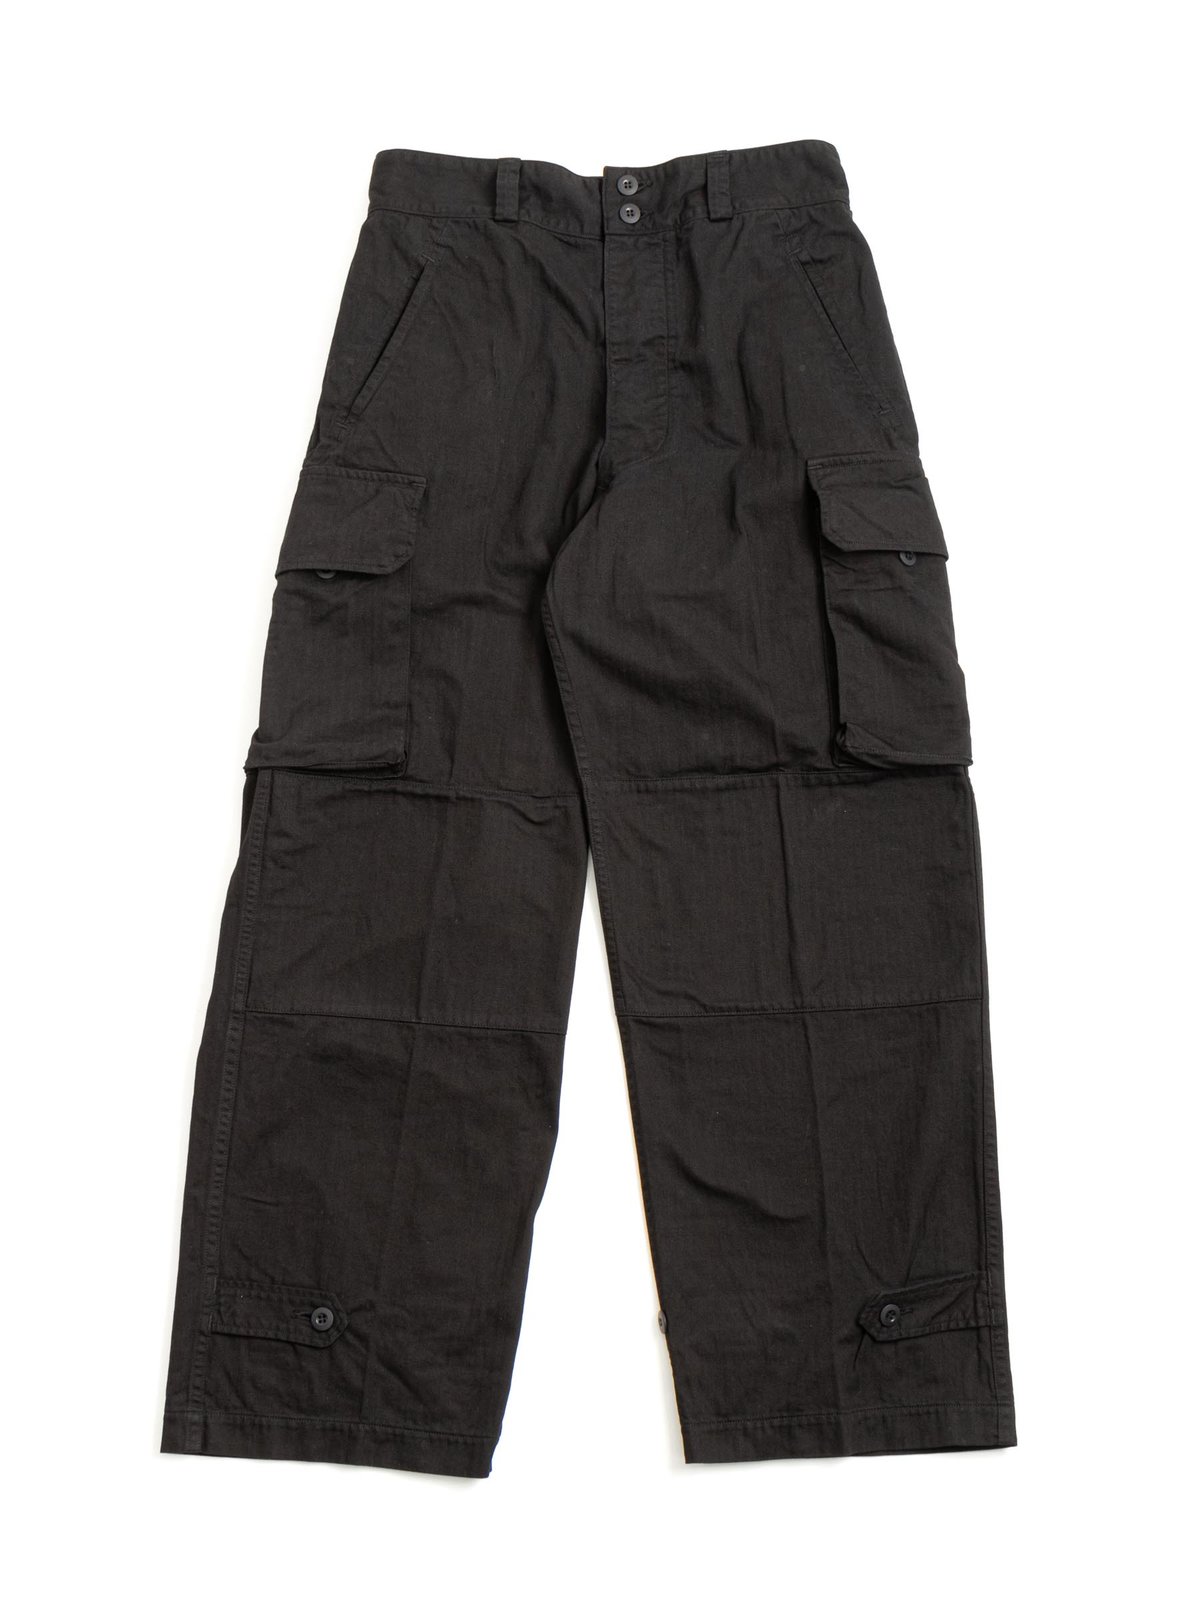 Buy Black Trousers & Pants for Men by SNITCH Online | Ajio.com